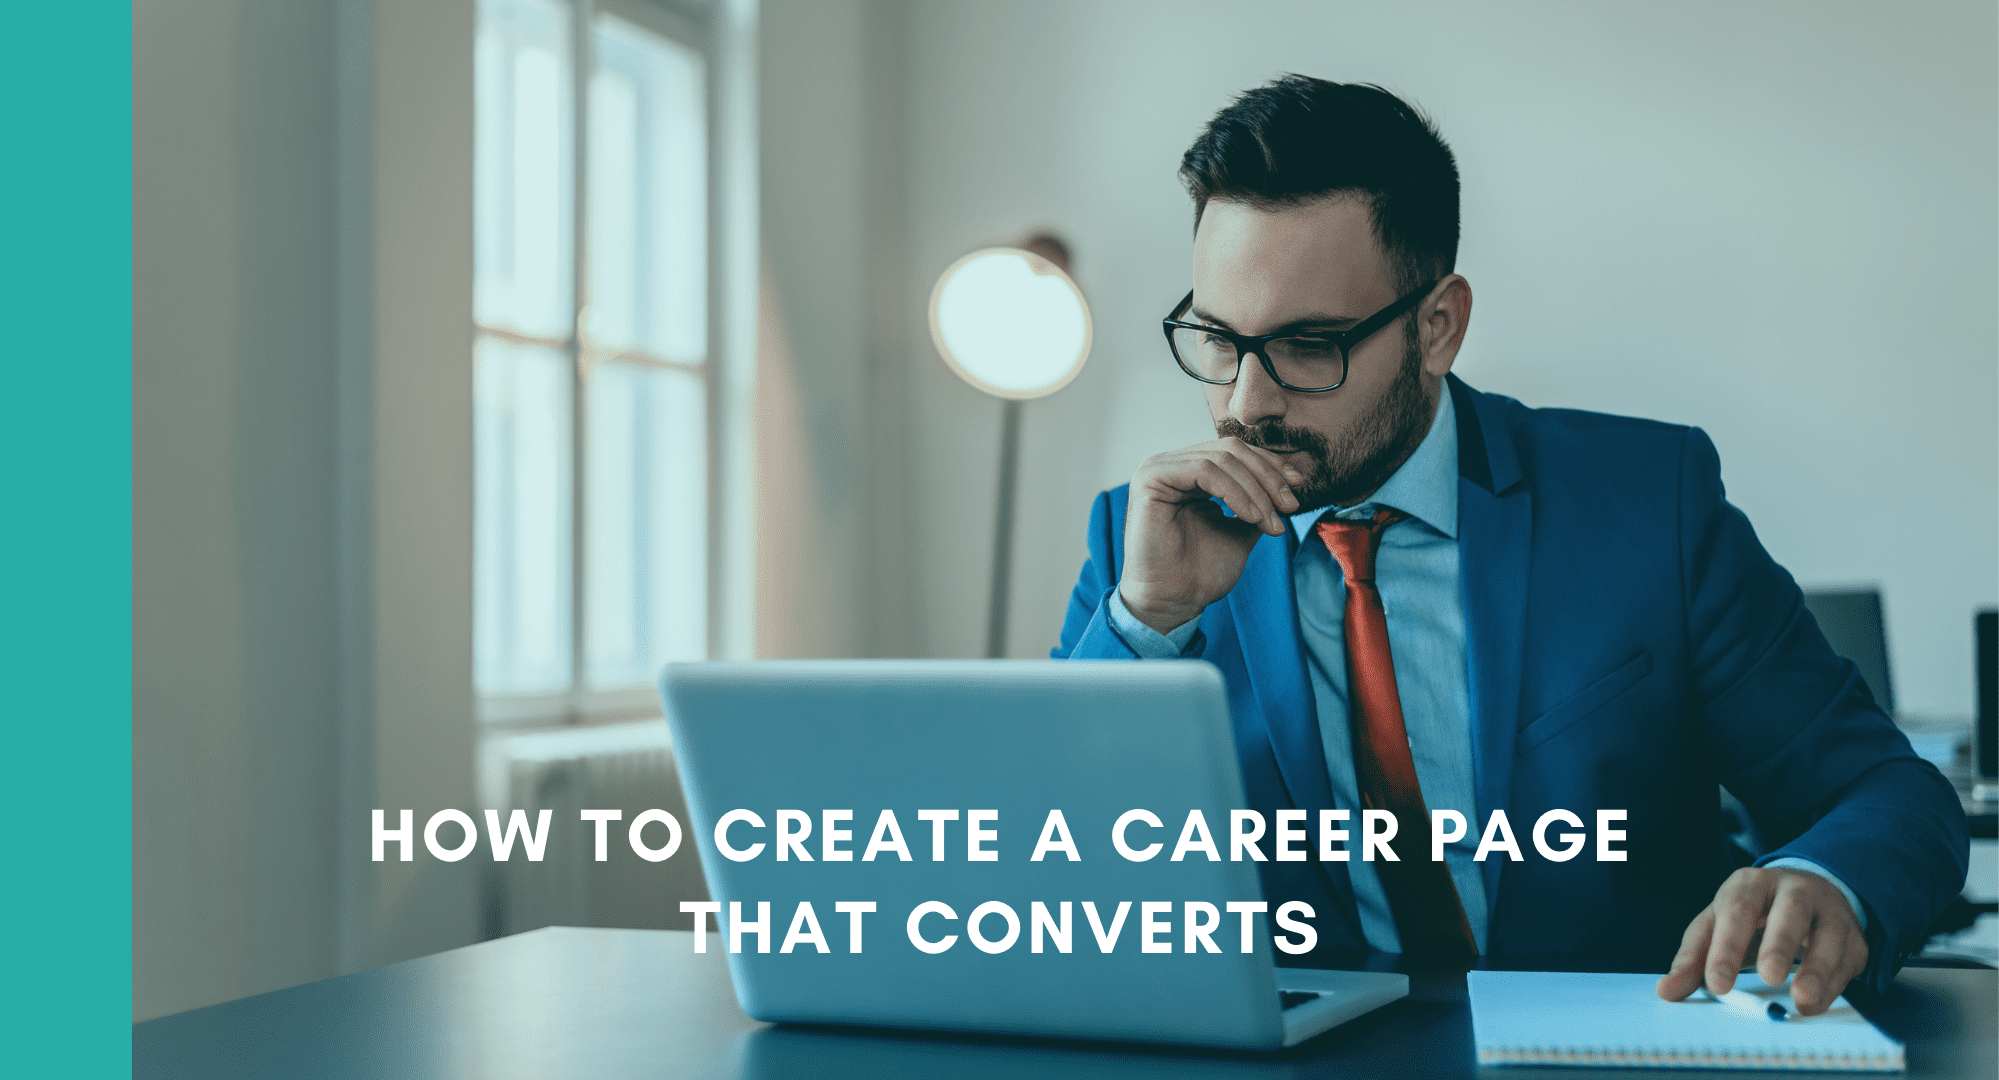 How to build a career page that converts. How to create a career page that attracts candidates.